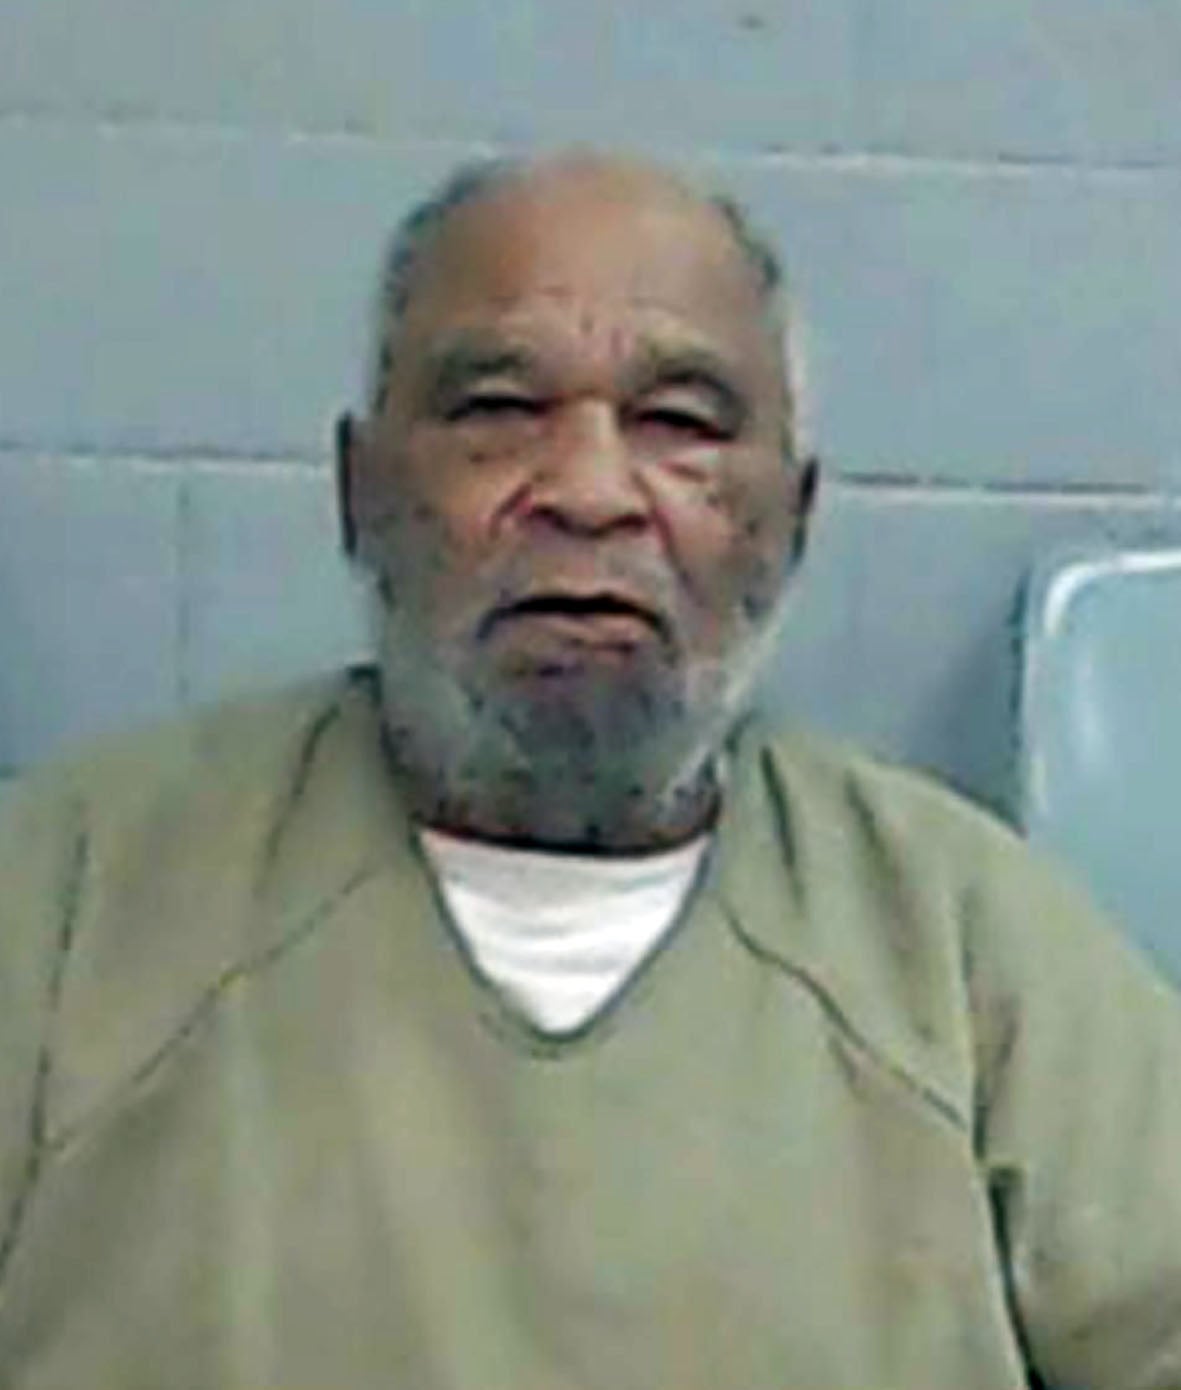 Samuel Little, the United States’ most prolific serial killer according to the FBI, has died in California, prison officials said